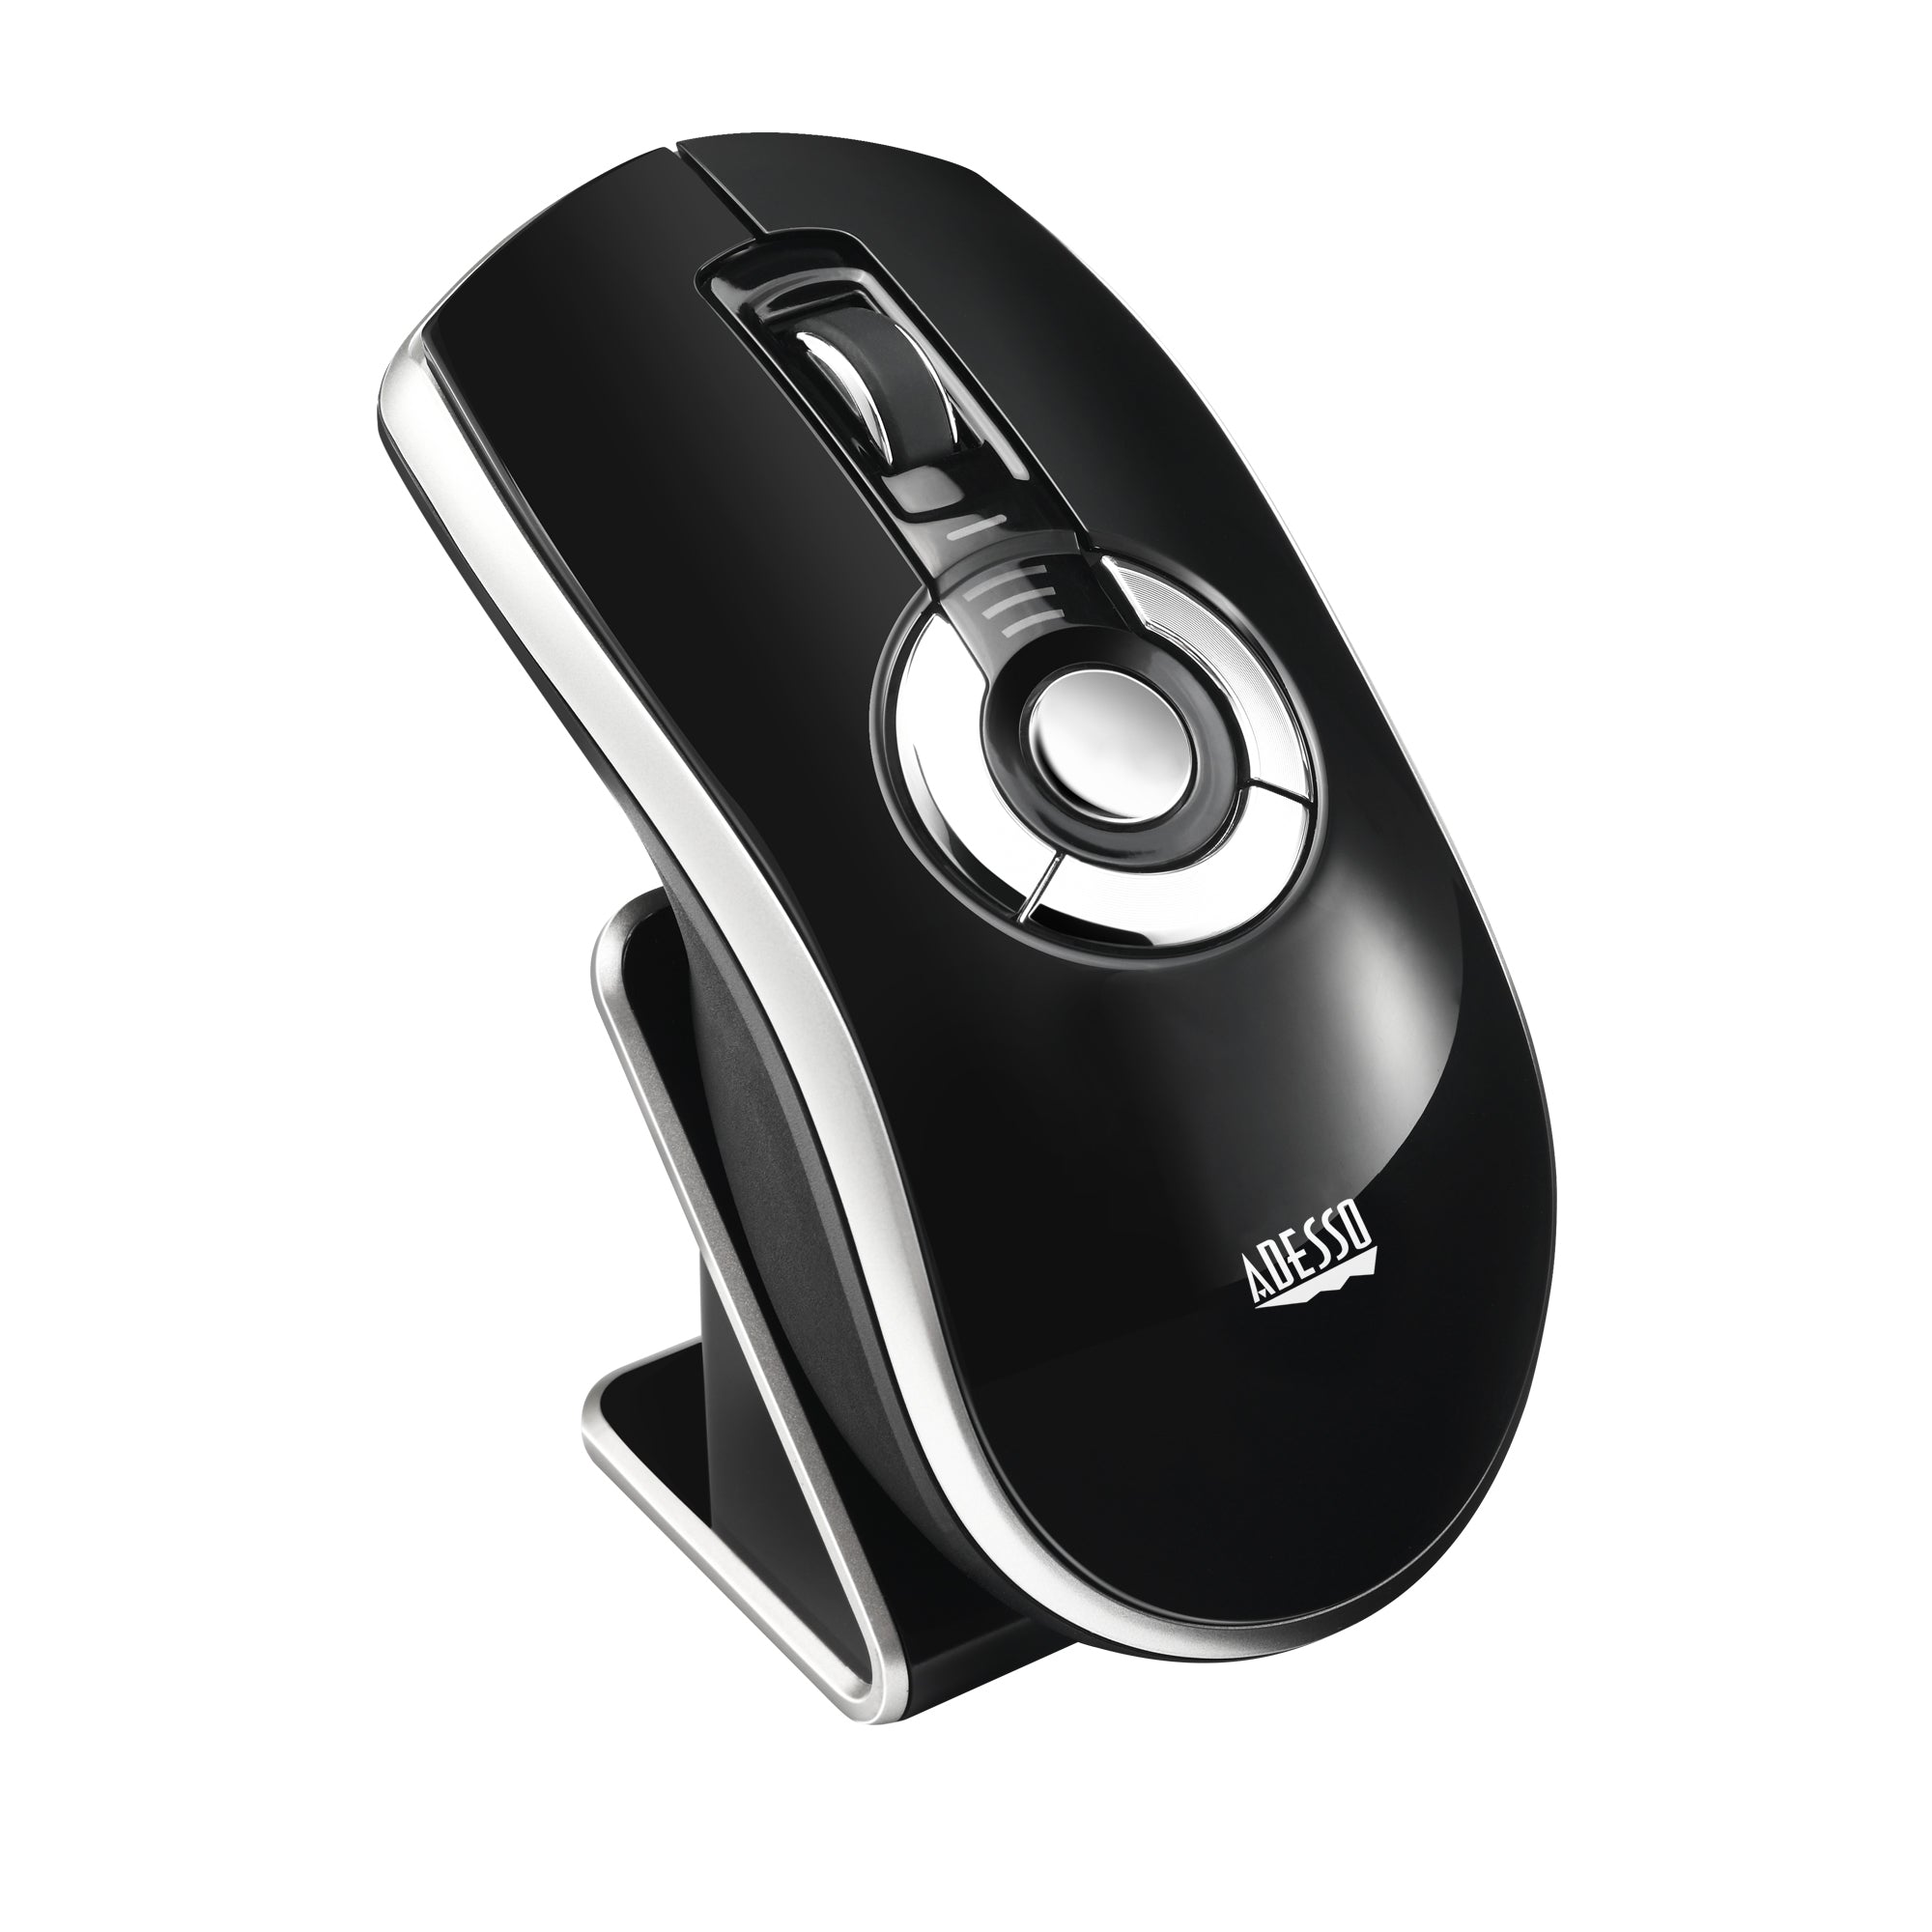 Adesso iMouse P20 mouse Office Ambidextrous RF Wireless